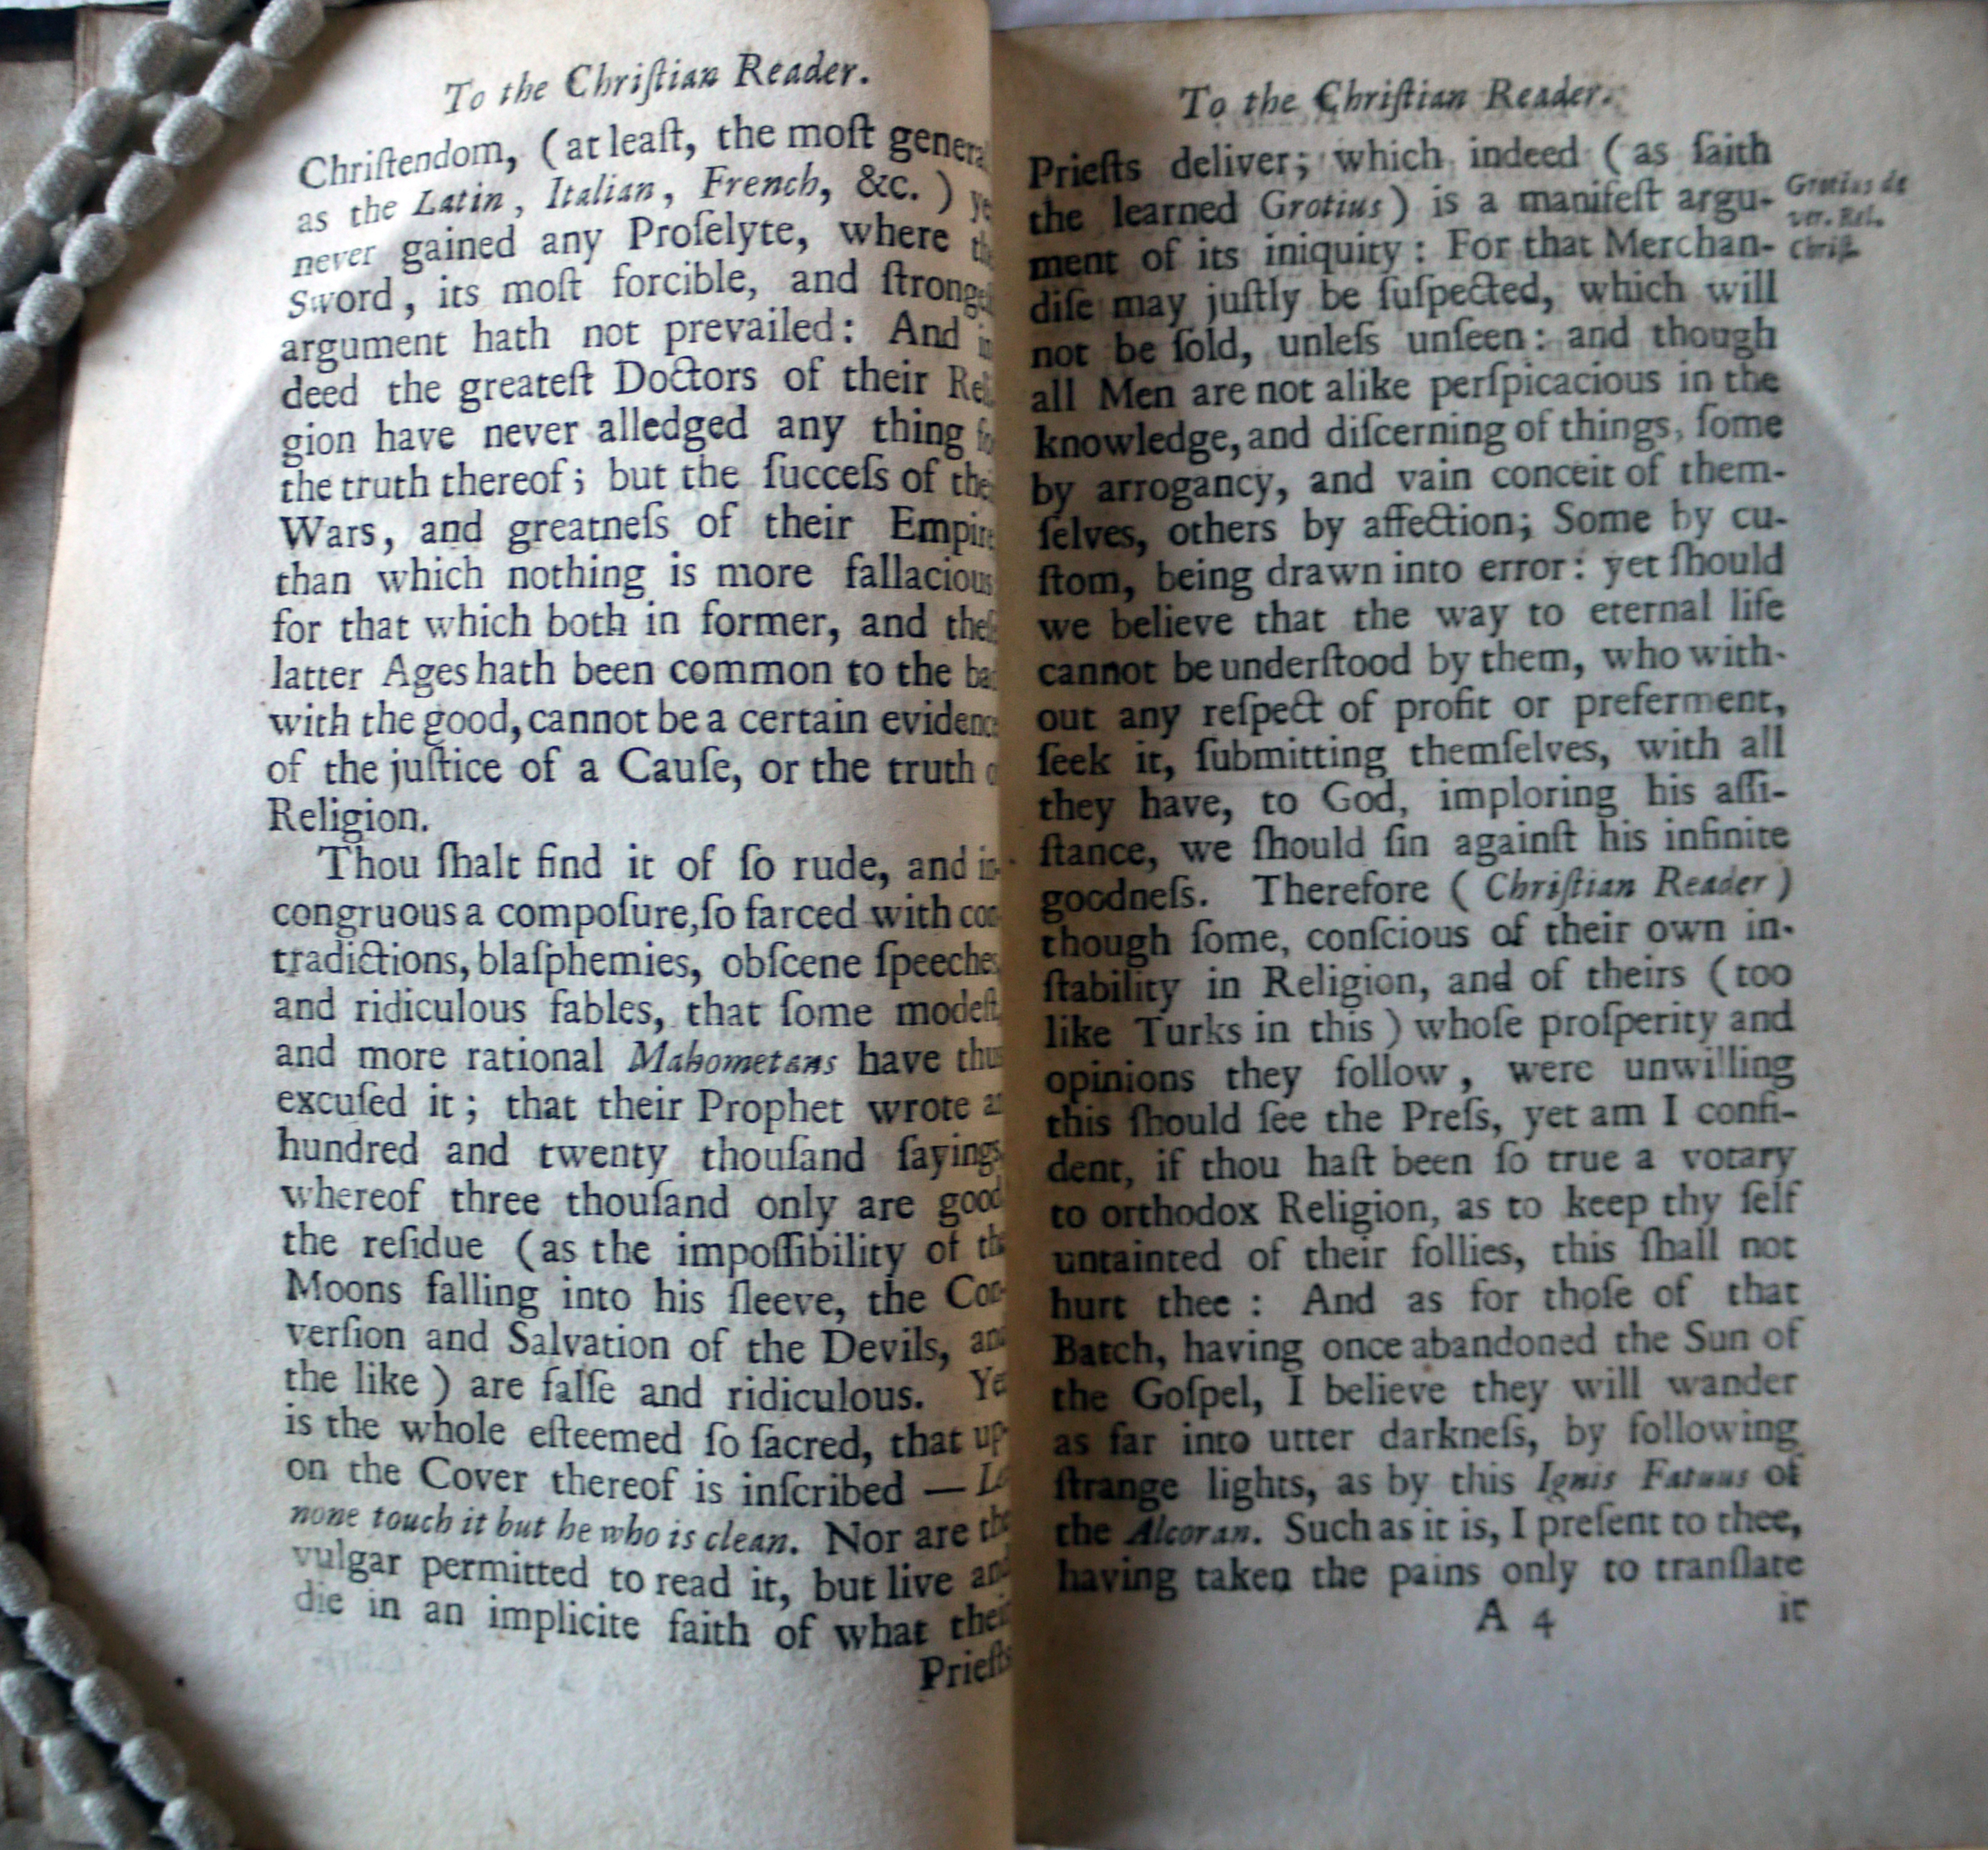 Introductory pages from to the English translation of the Koran